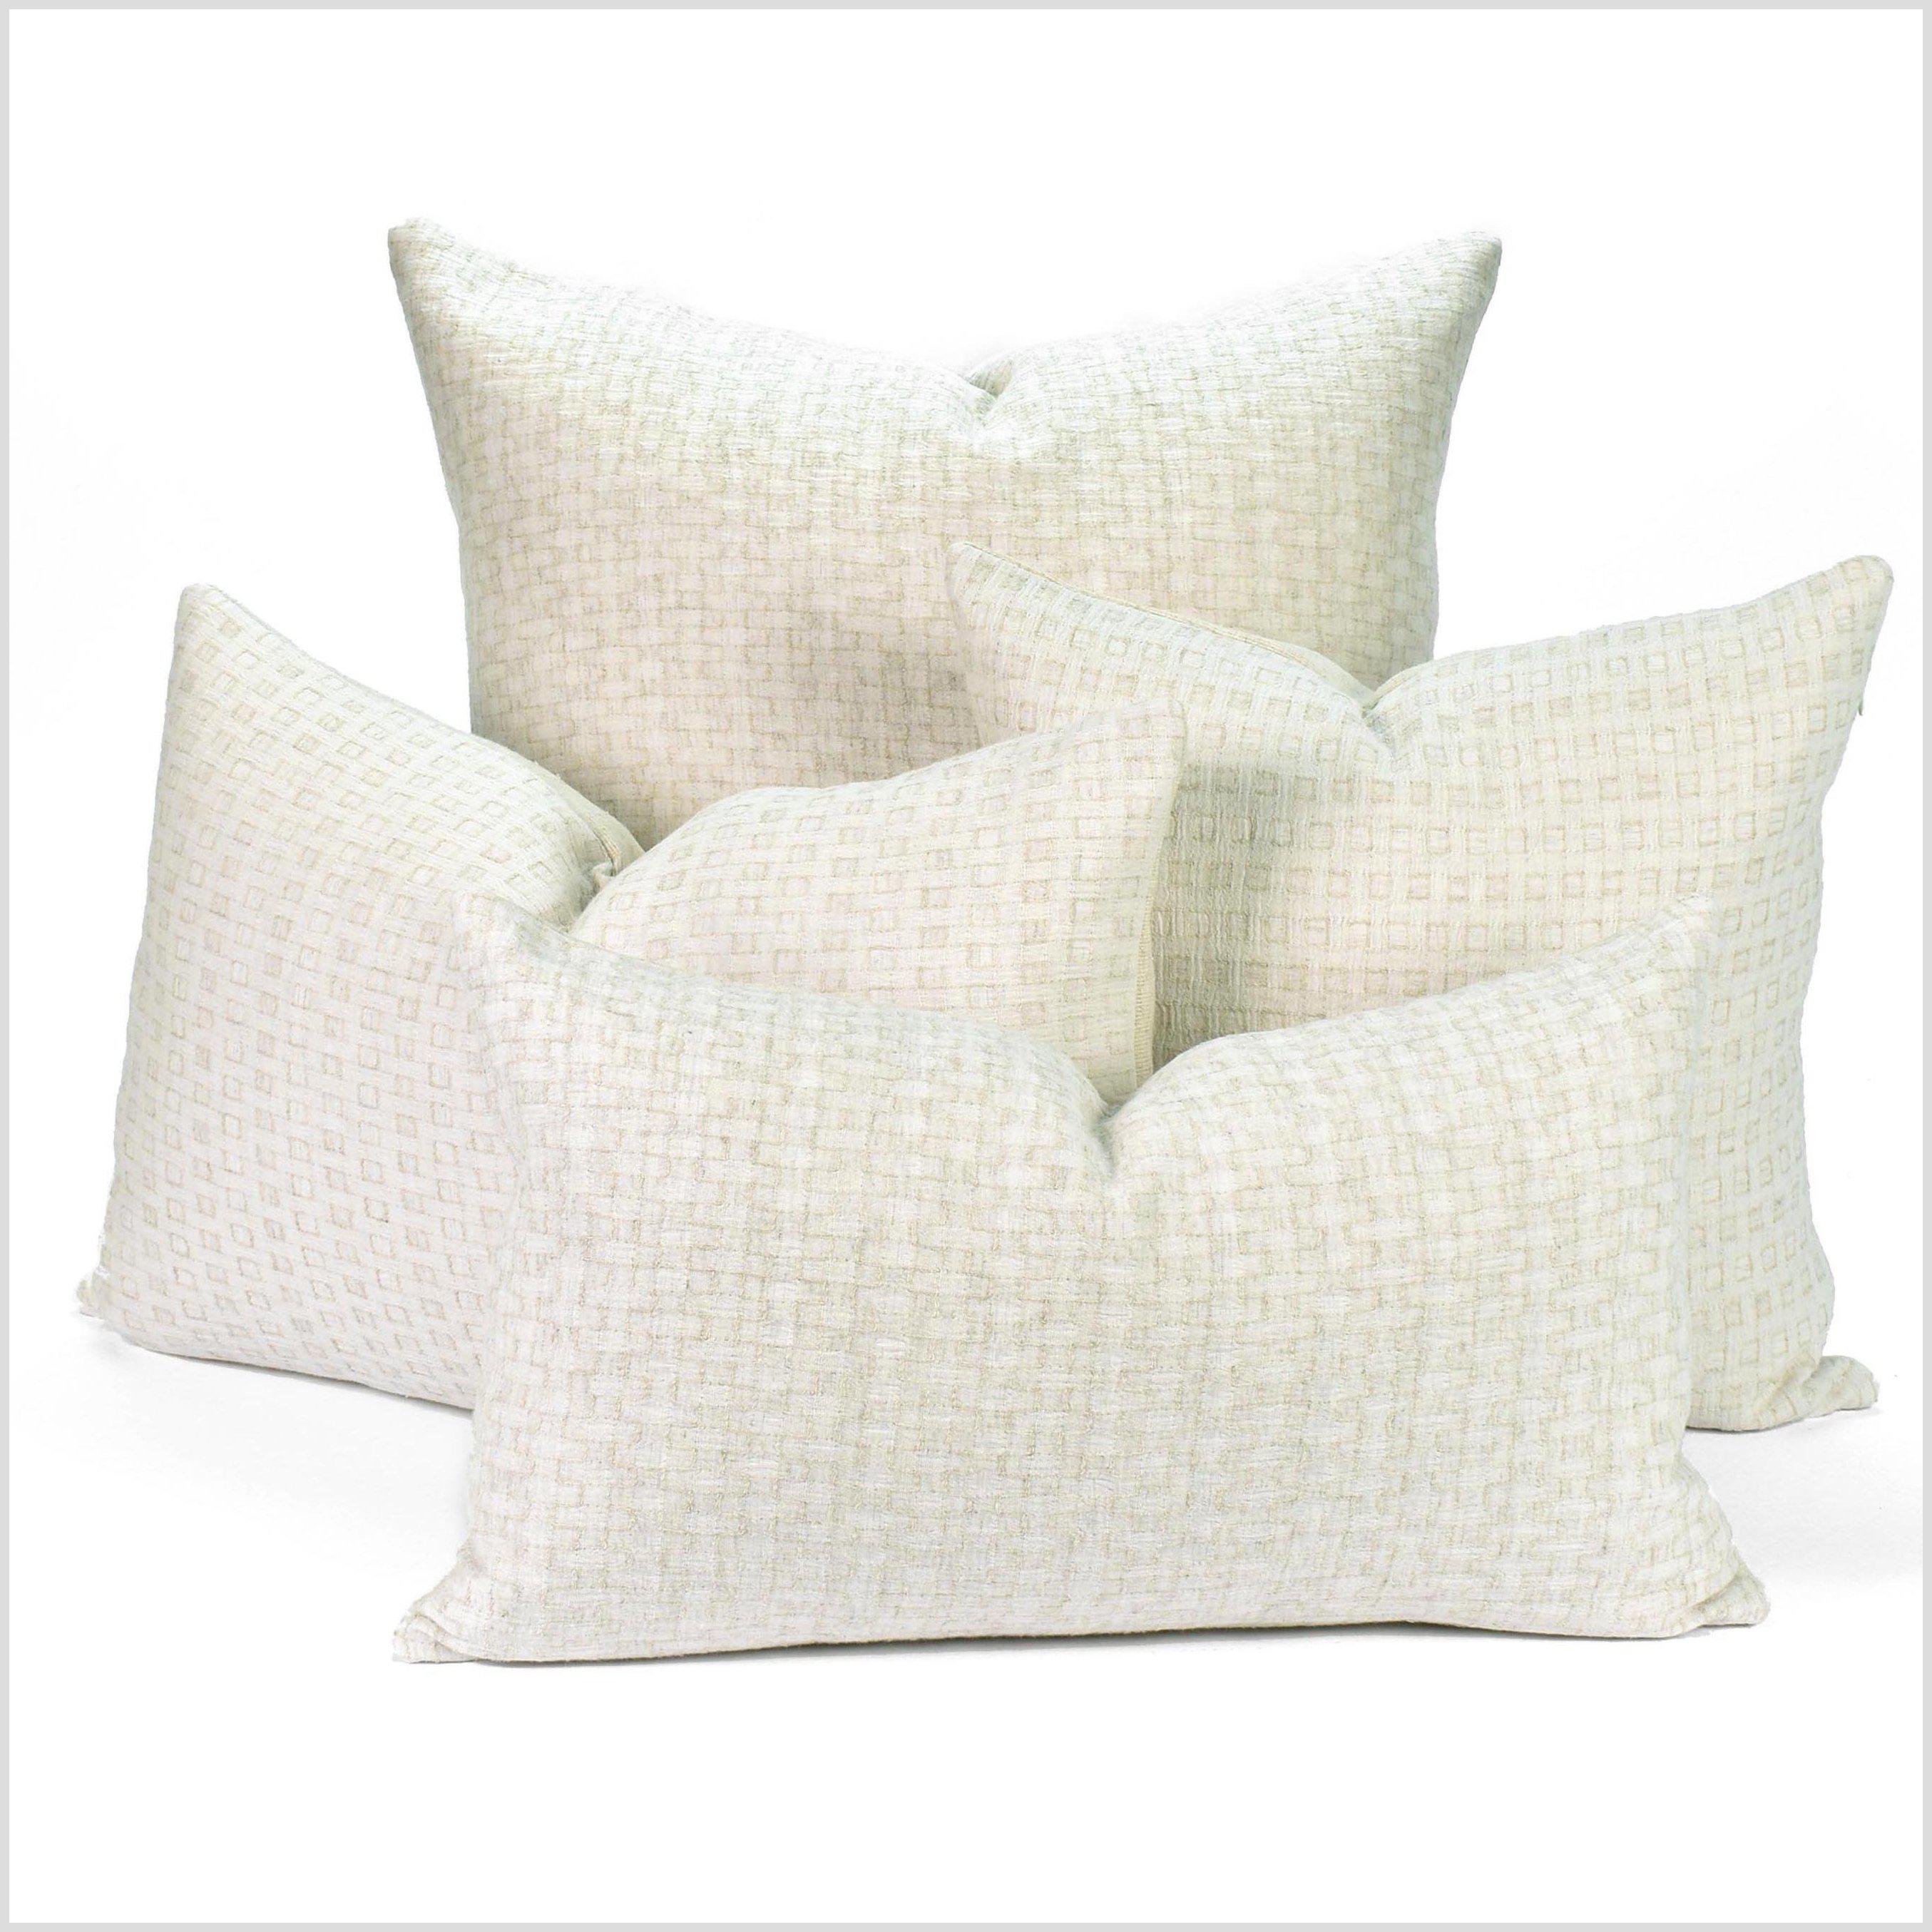 MIULEE Linen Throw Pillow Covers Decorative Cotton Soft Square Cushion